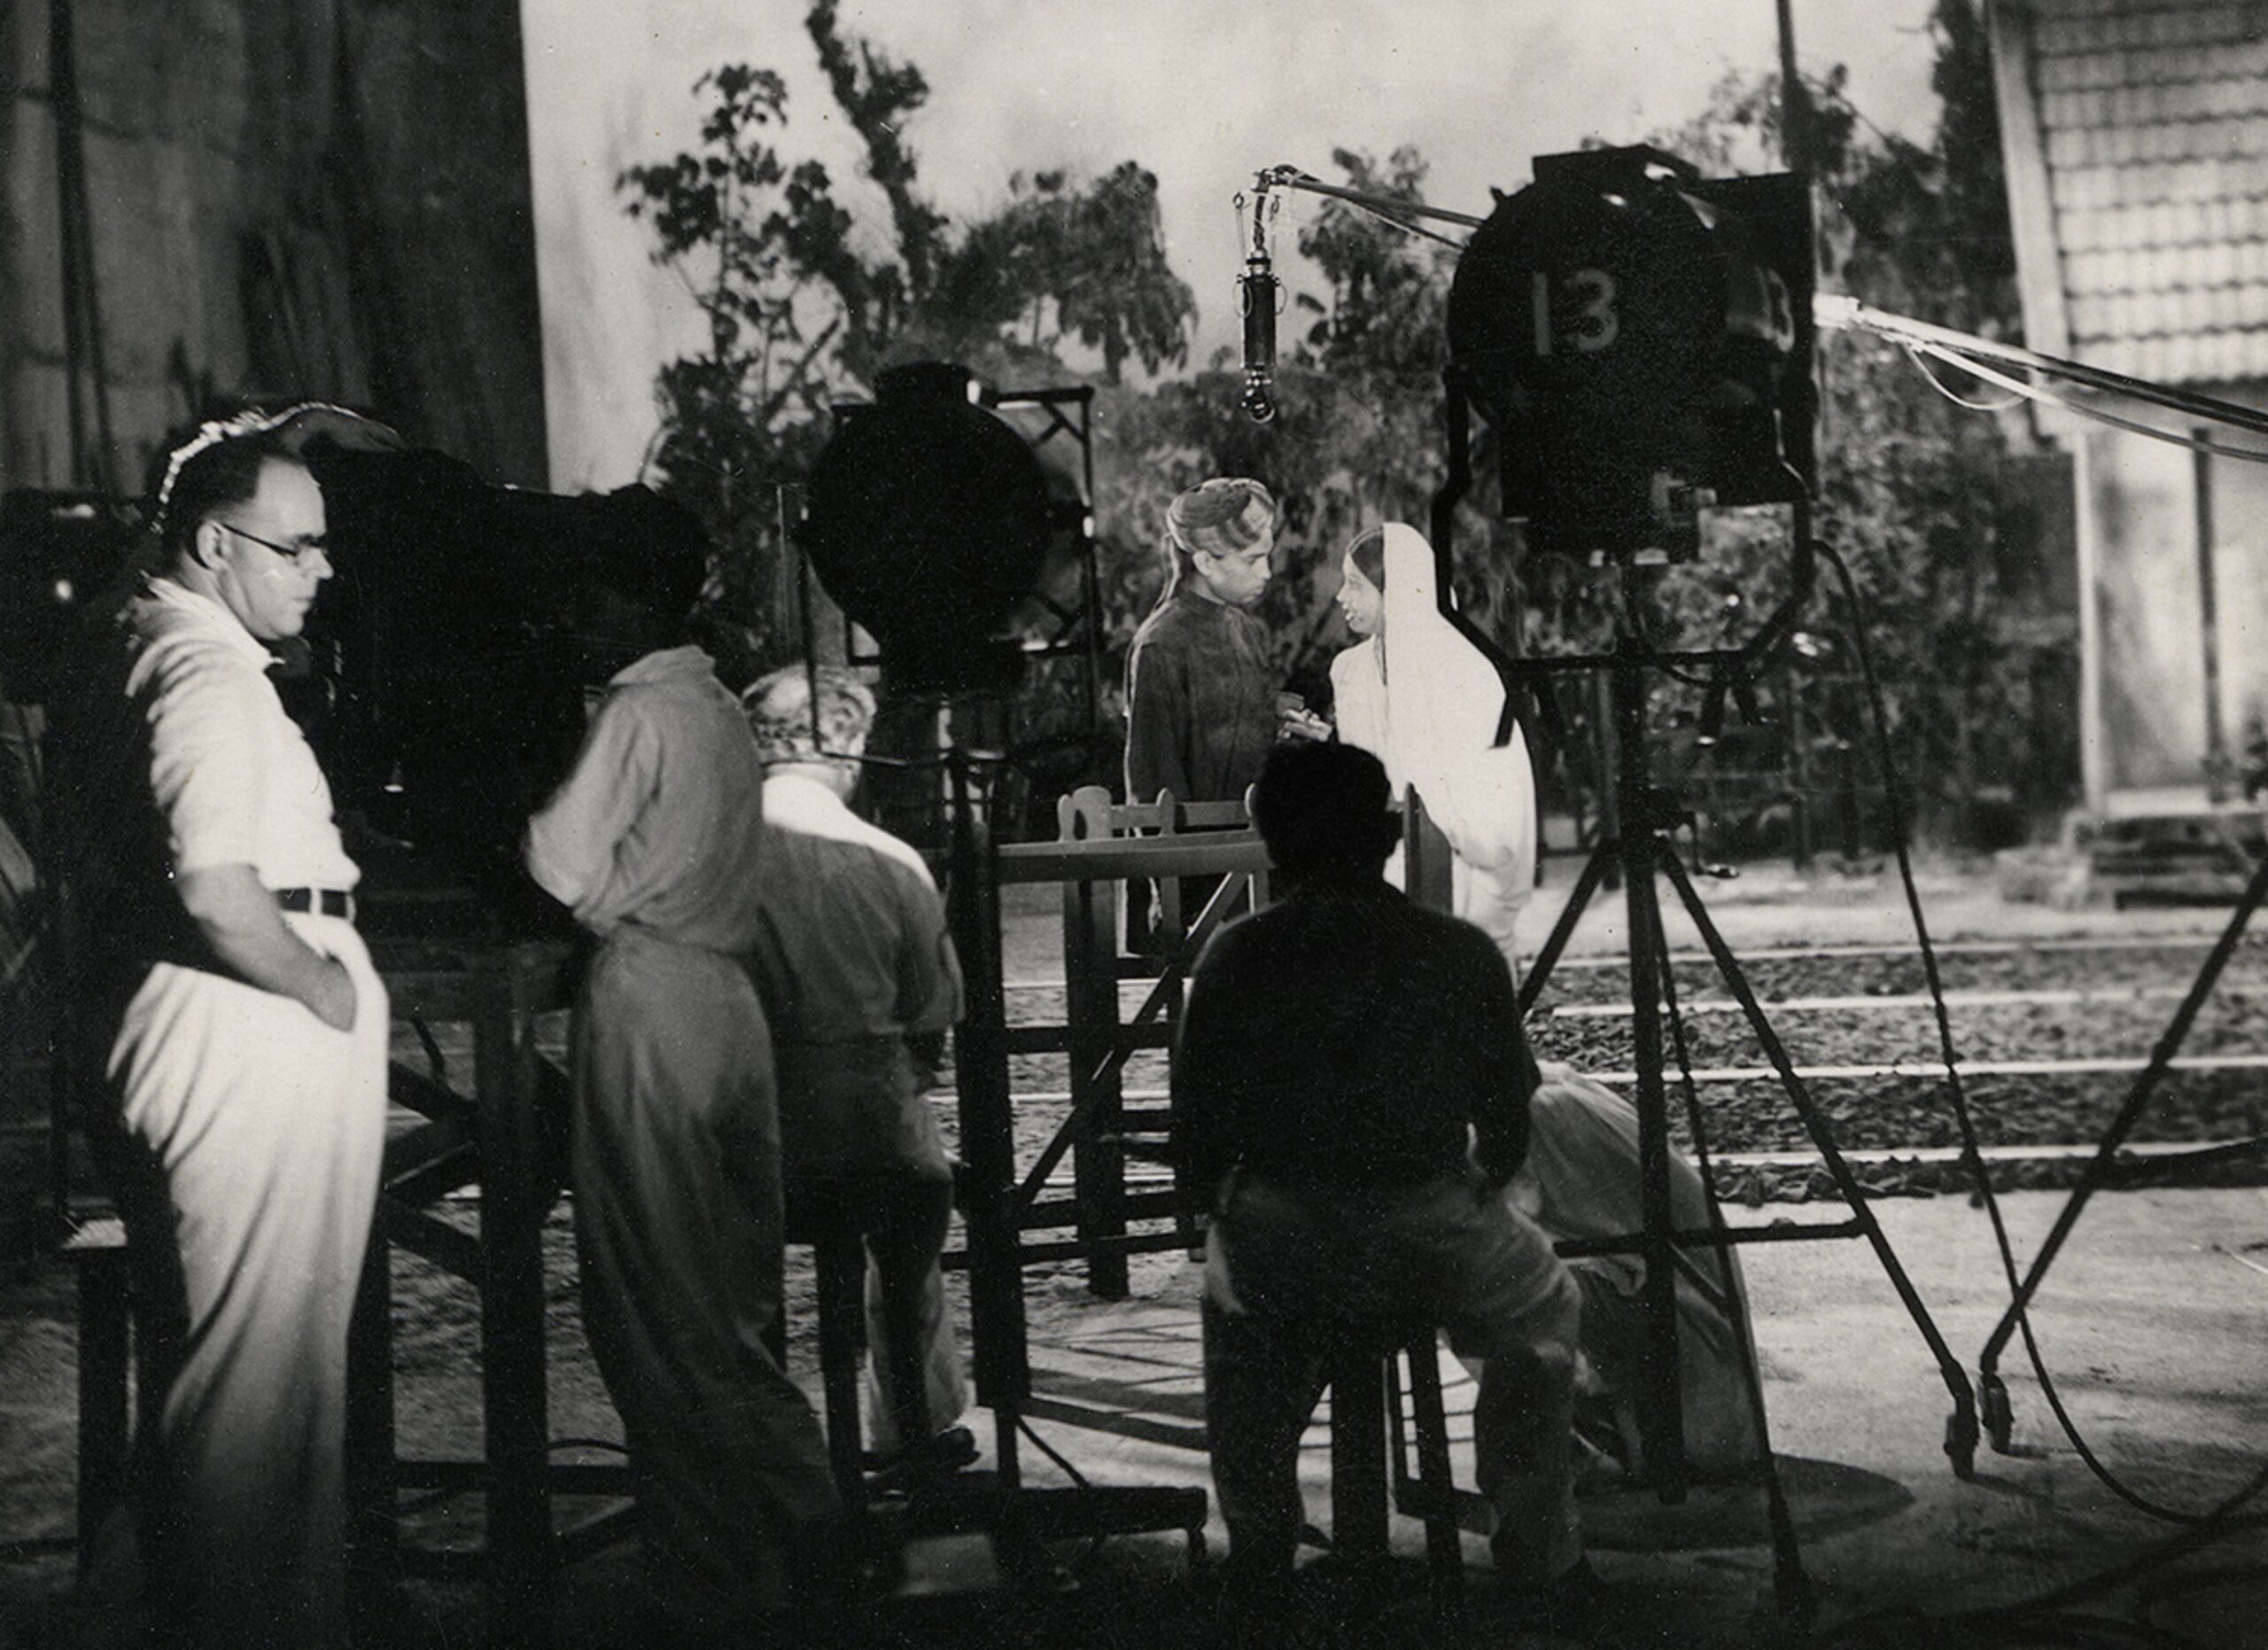 black and white photograph from a film set showing four crew members and two actors with various filming equipment